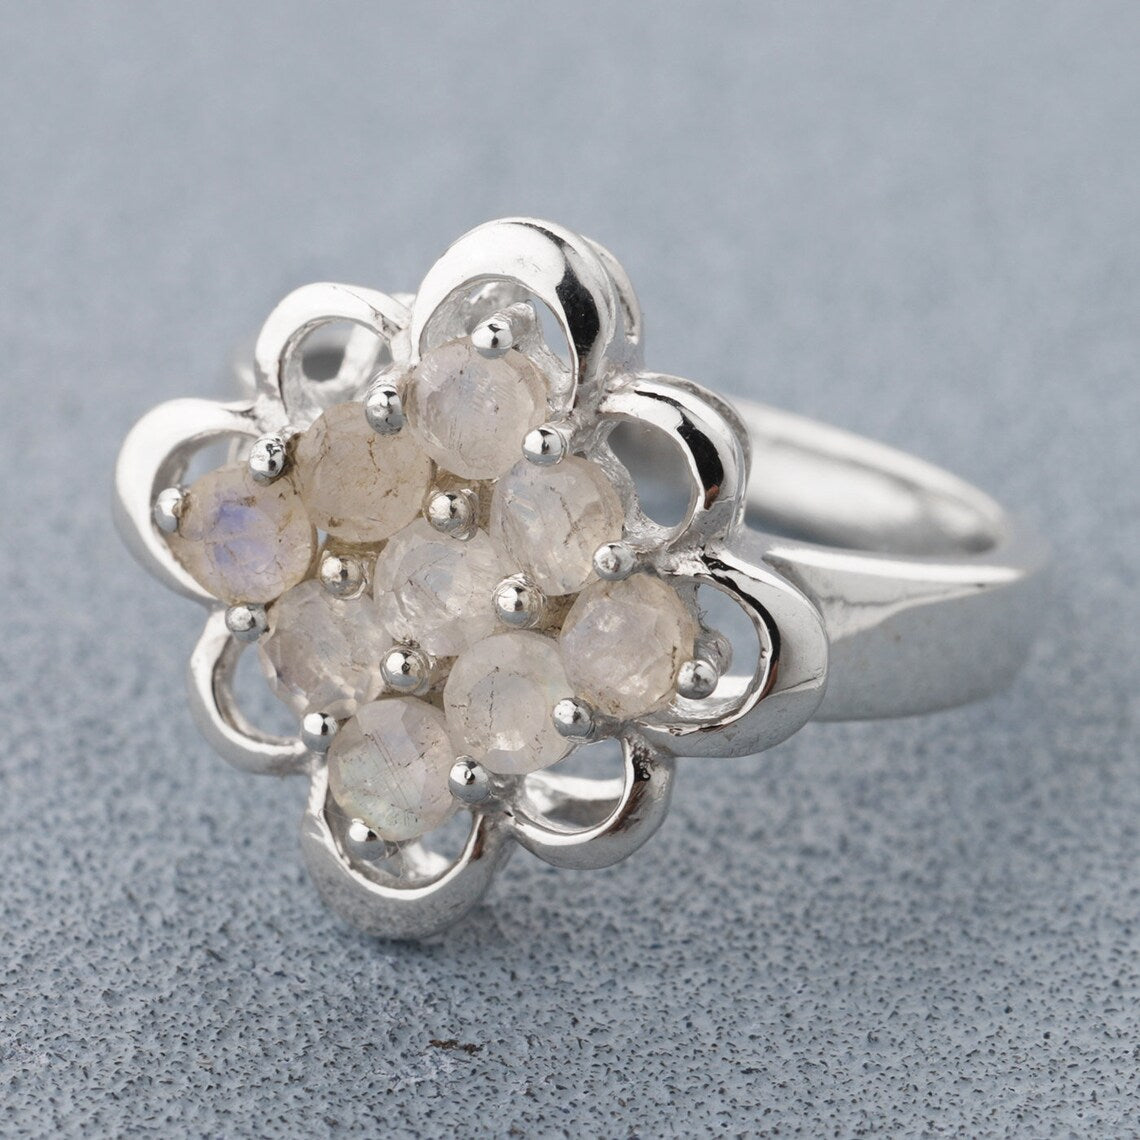 Moonstone ring, round moonstone ring, blue and white moonstone ring, moonstone solitaire ring in silver and gold,natural moonstone